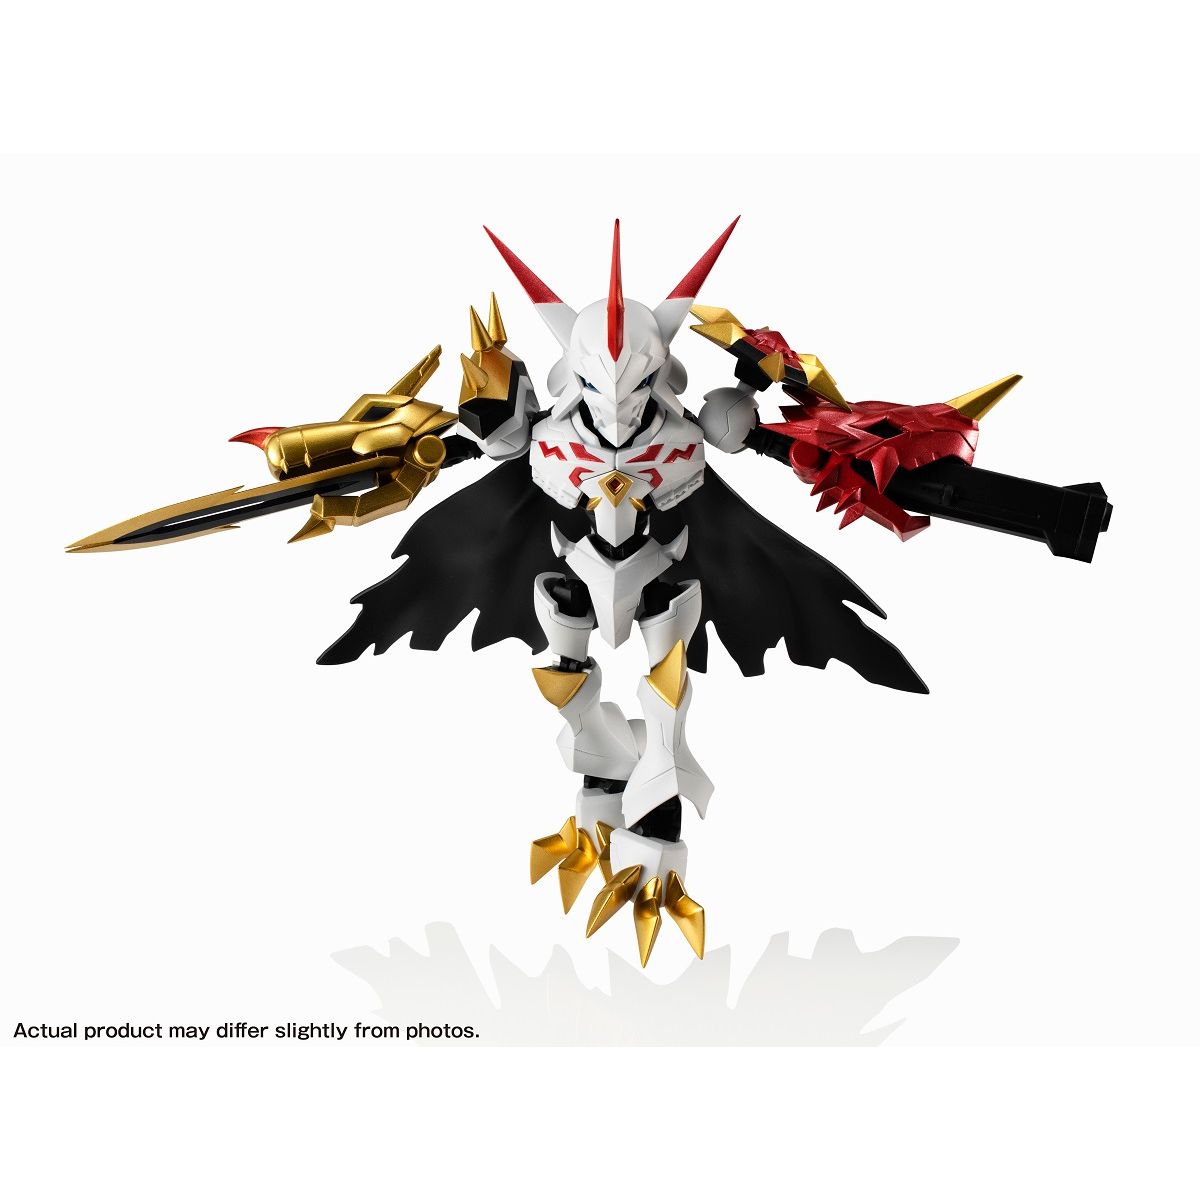 Nxedge Style [Digimon Unit] "Omegamon Alter-S "-Bandai-Ace Cards & Collectibles